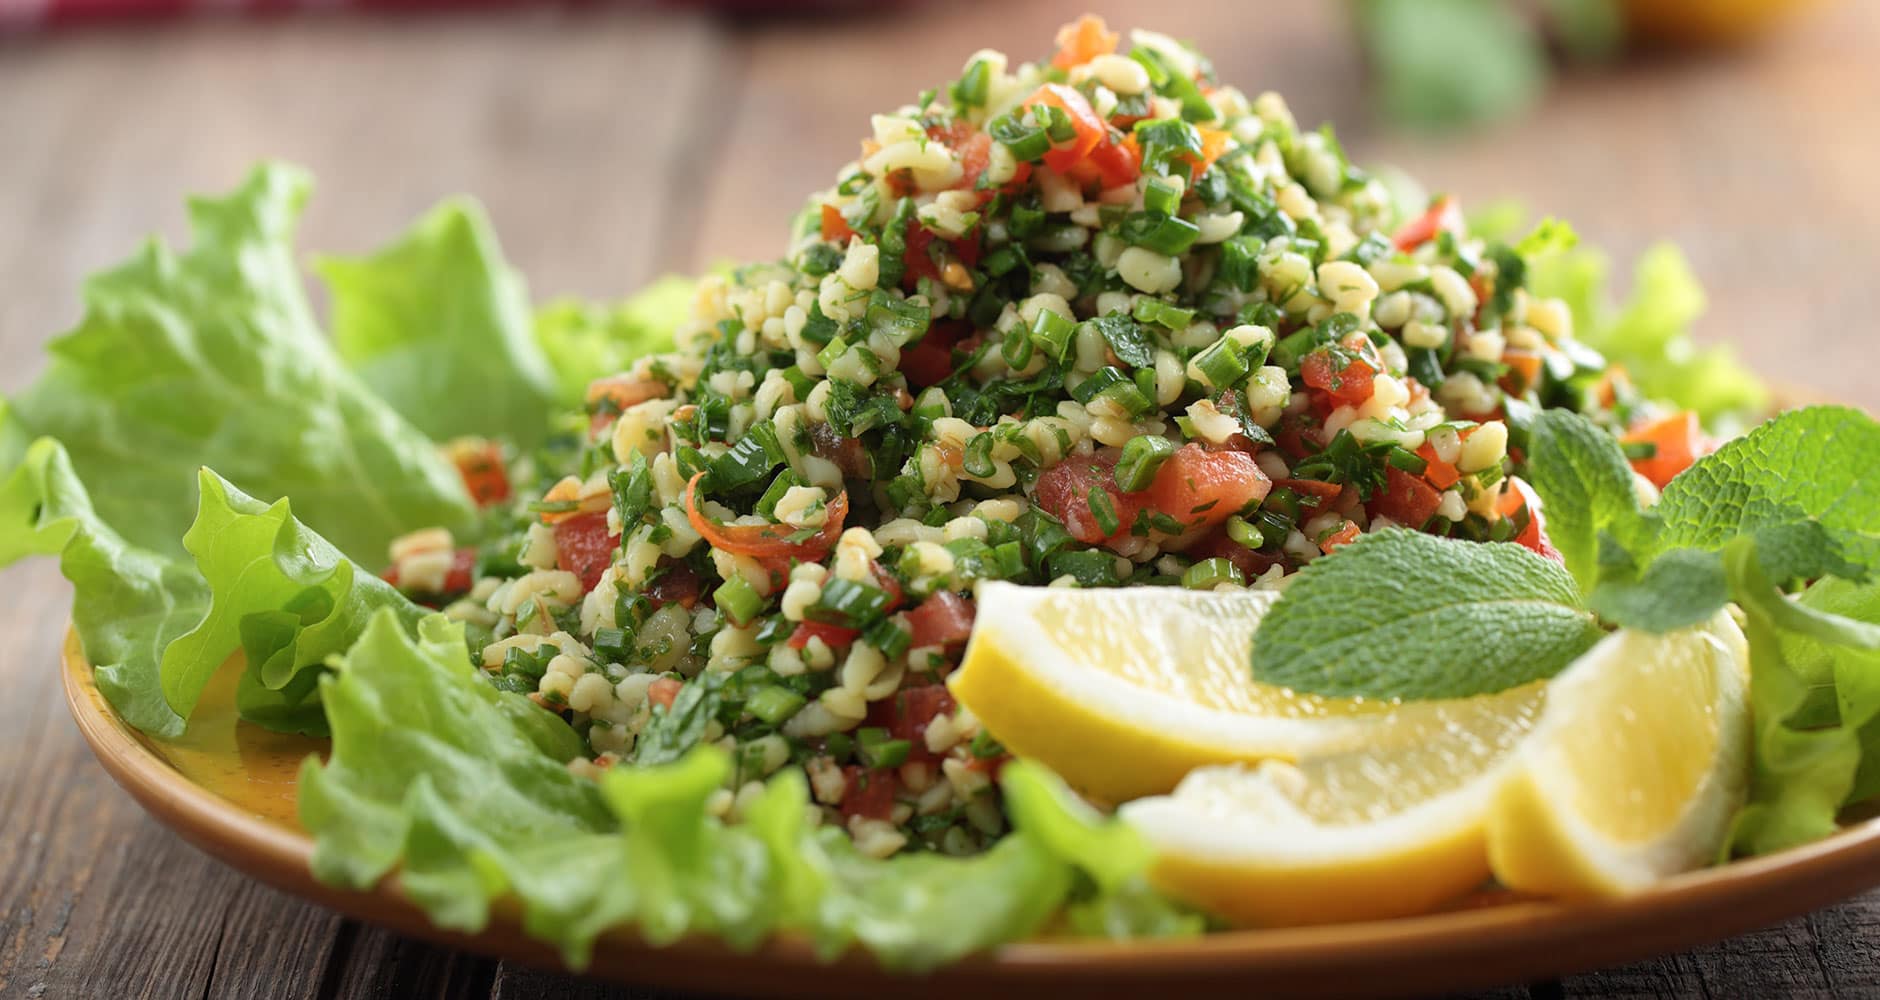 Fresh tabouleh salad on a plate with lemon and mint.